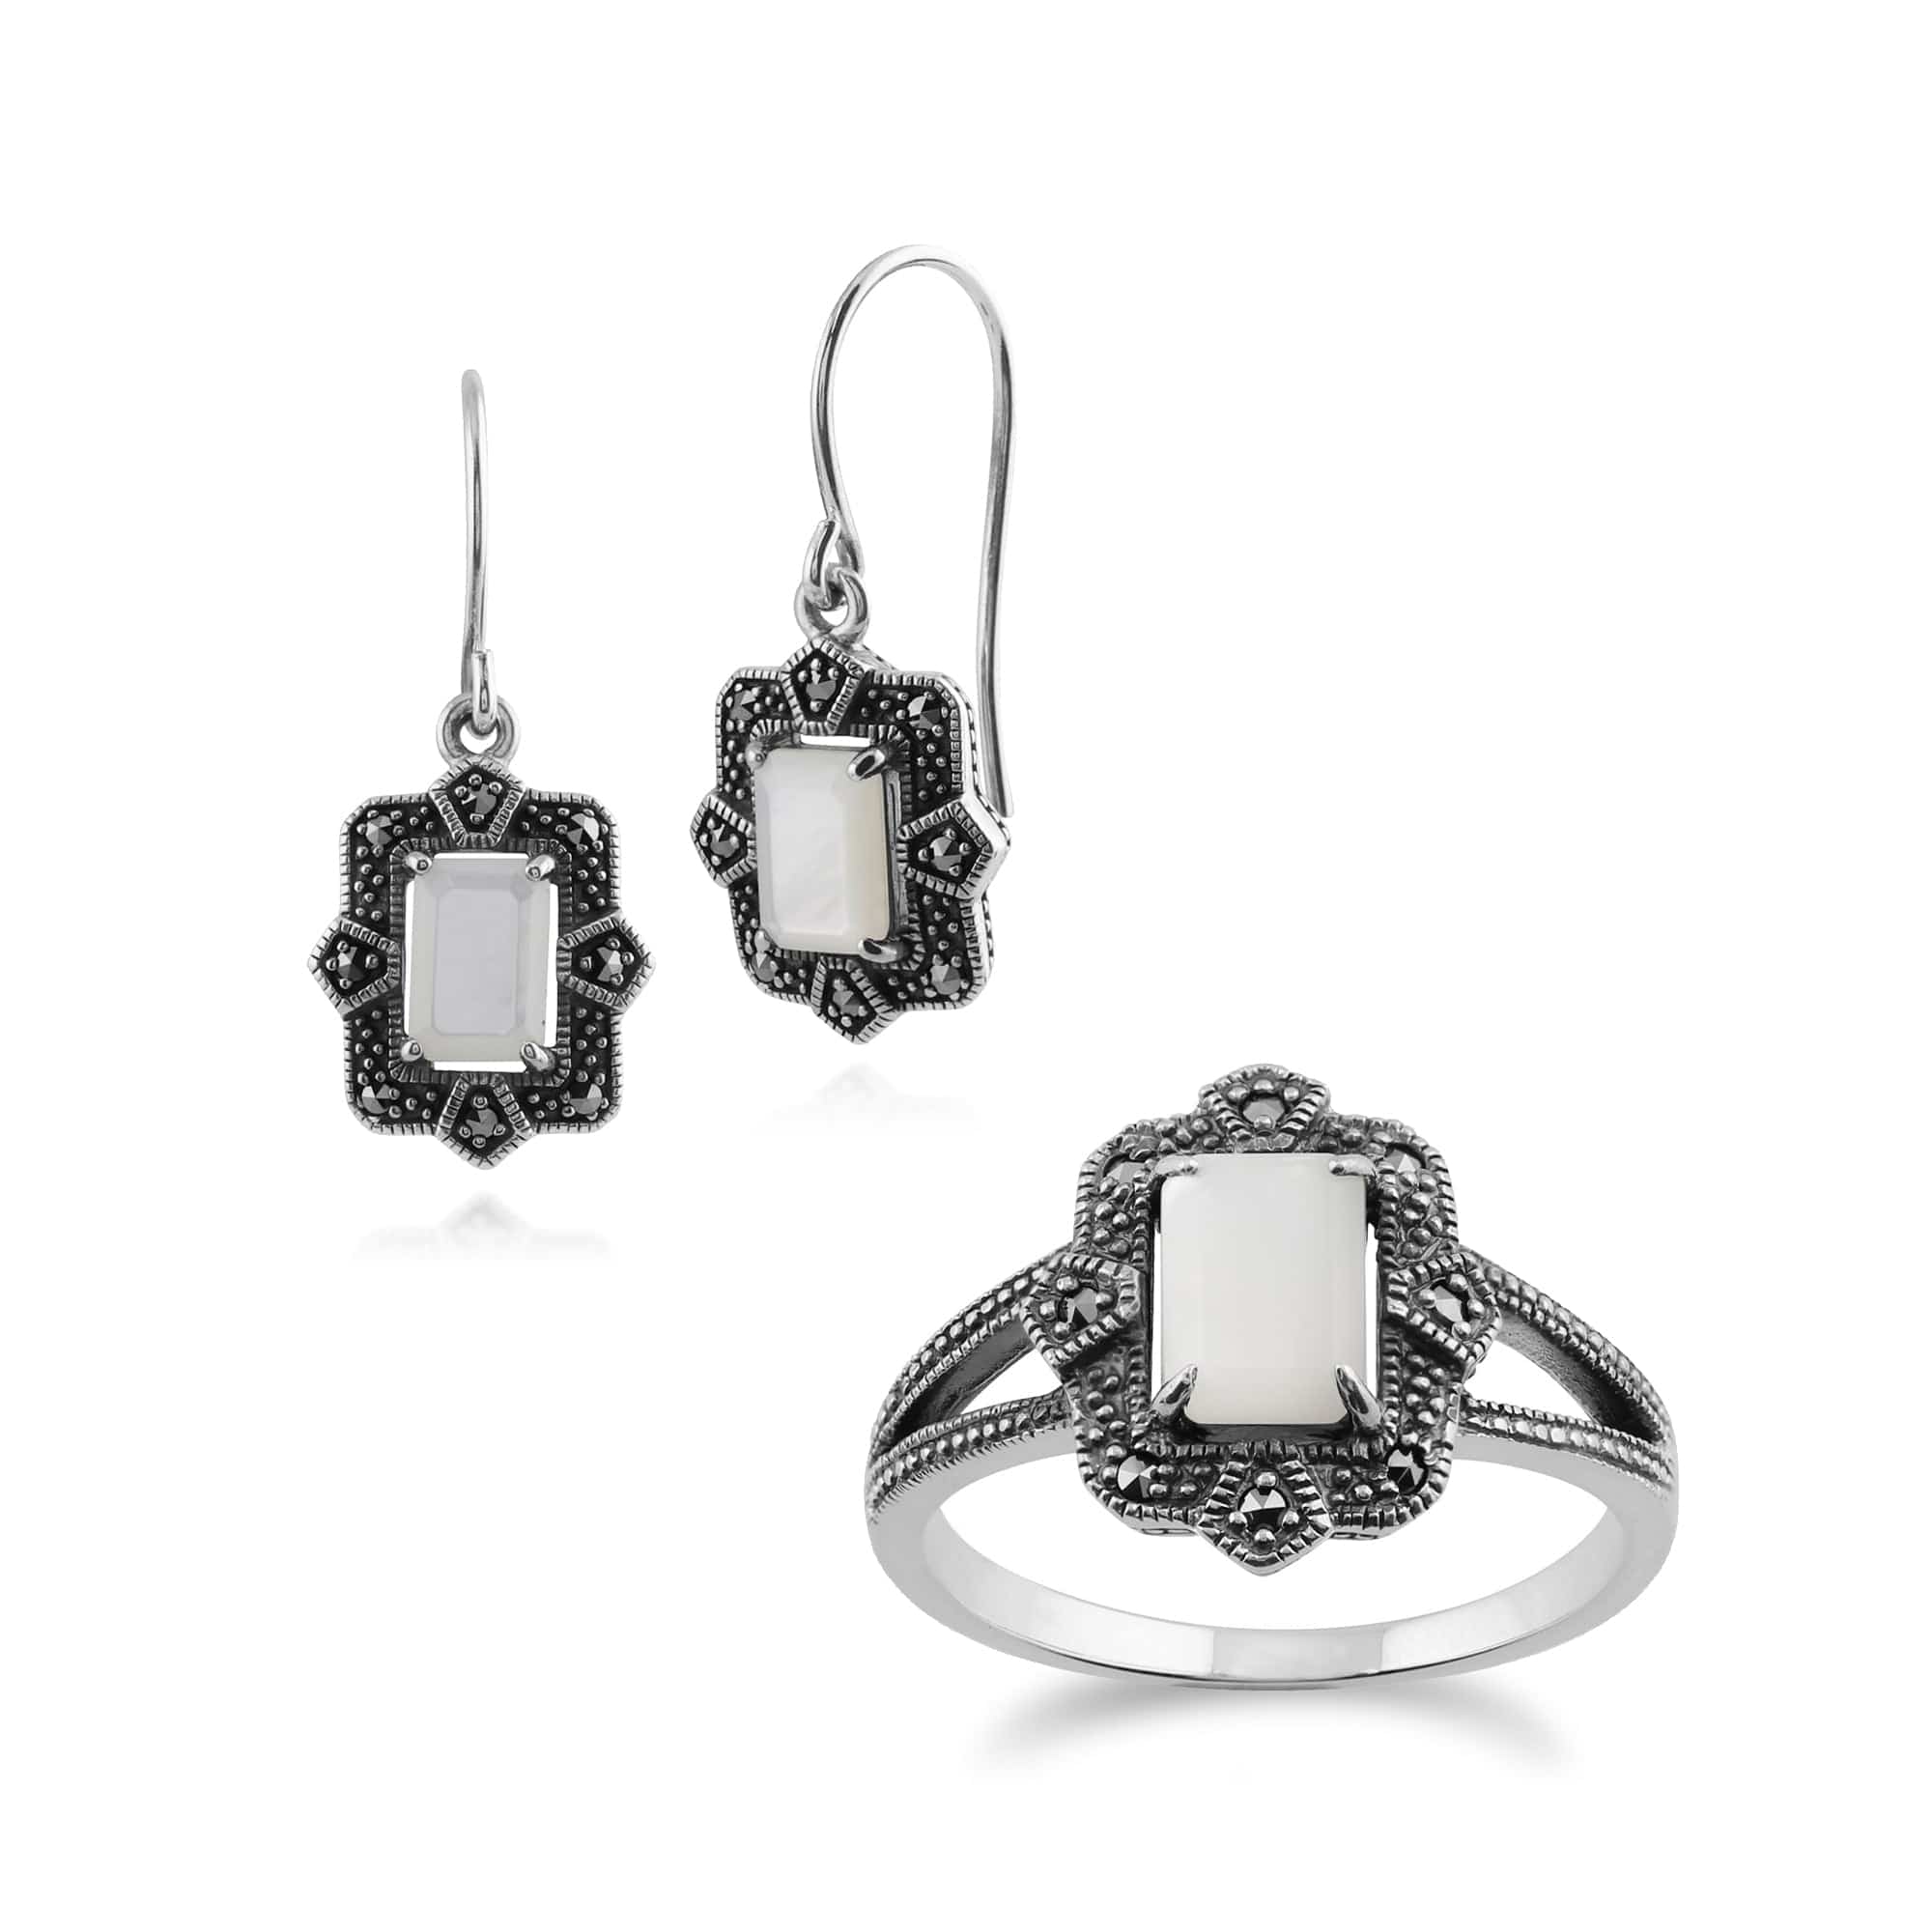 214E850302925-214R479004925 Art Deco Style Baguette Mother of Pearl & Marcasite Framed Drop Earrings & Ring Set in 925 Sterling Silver 1